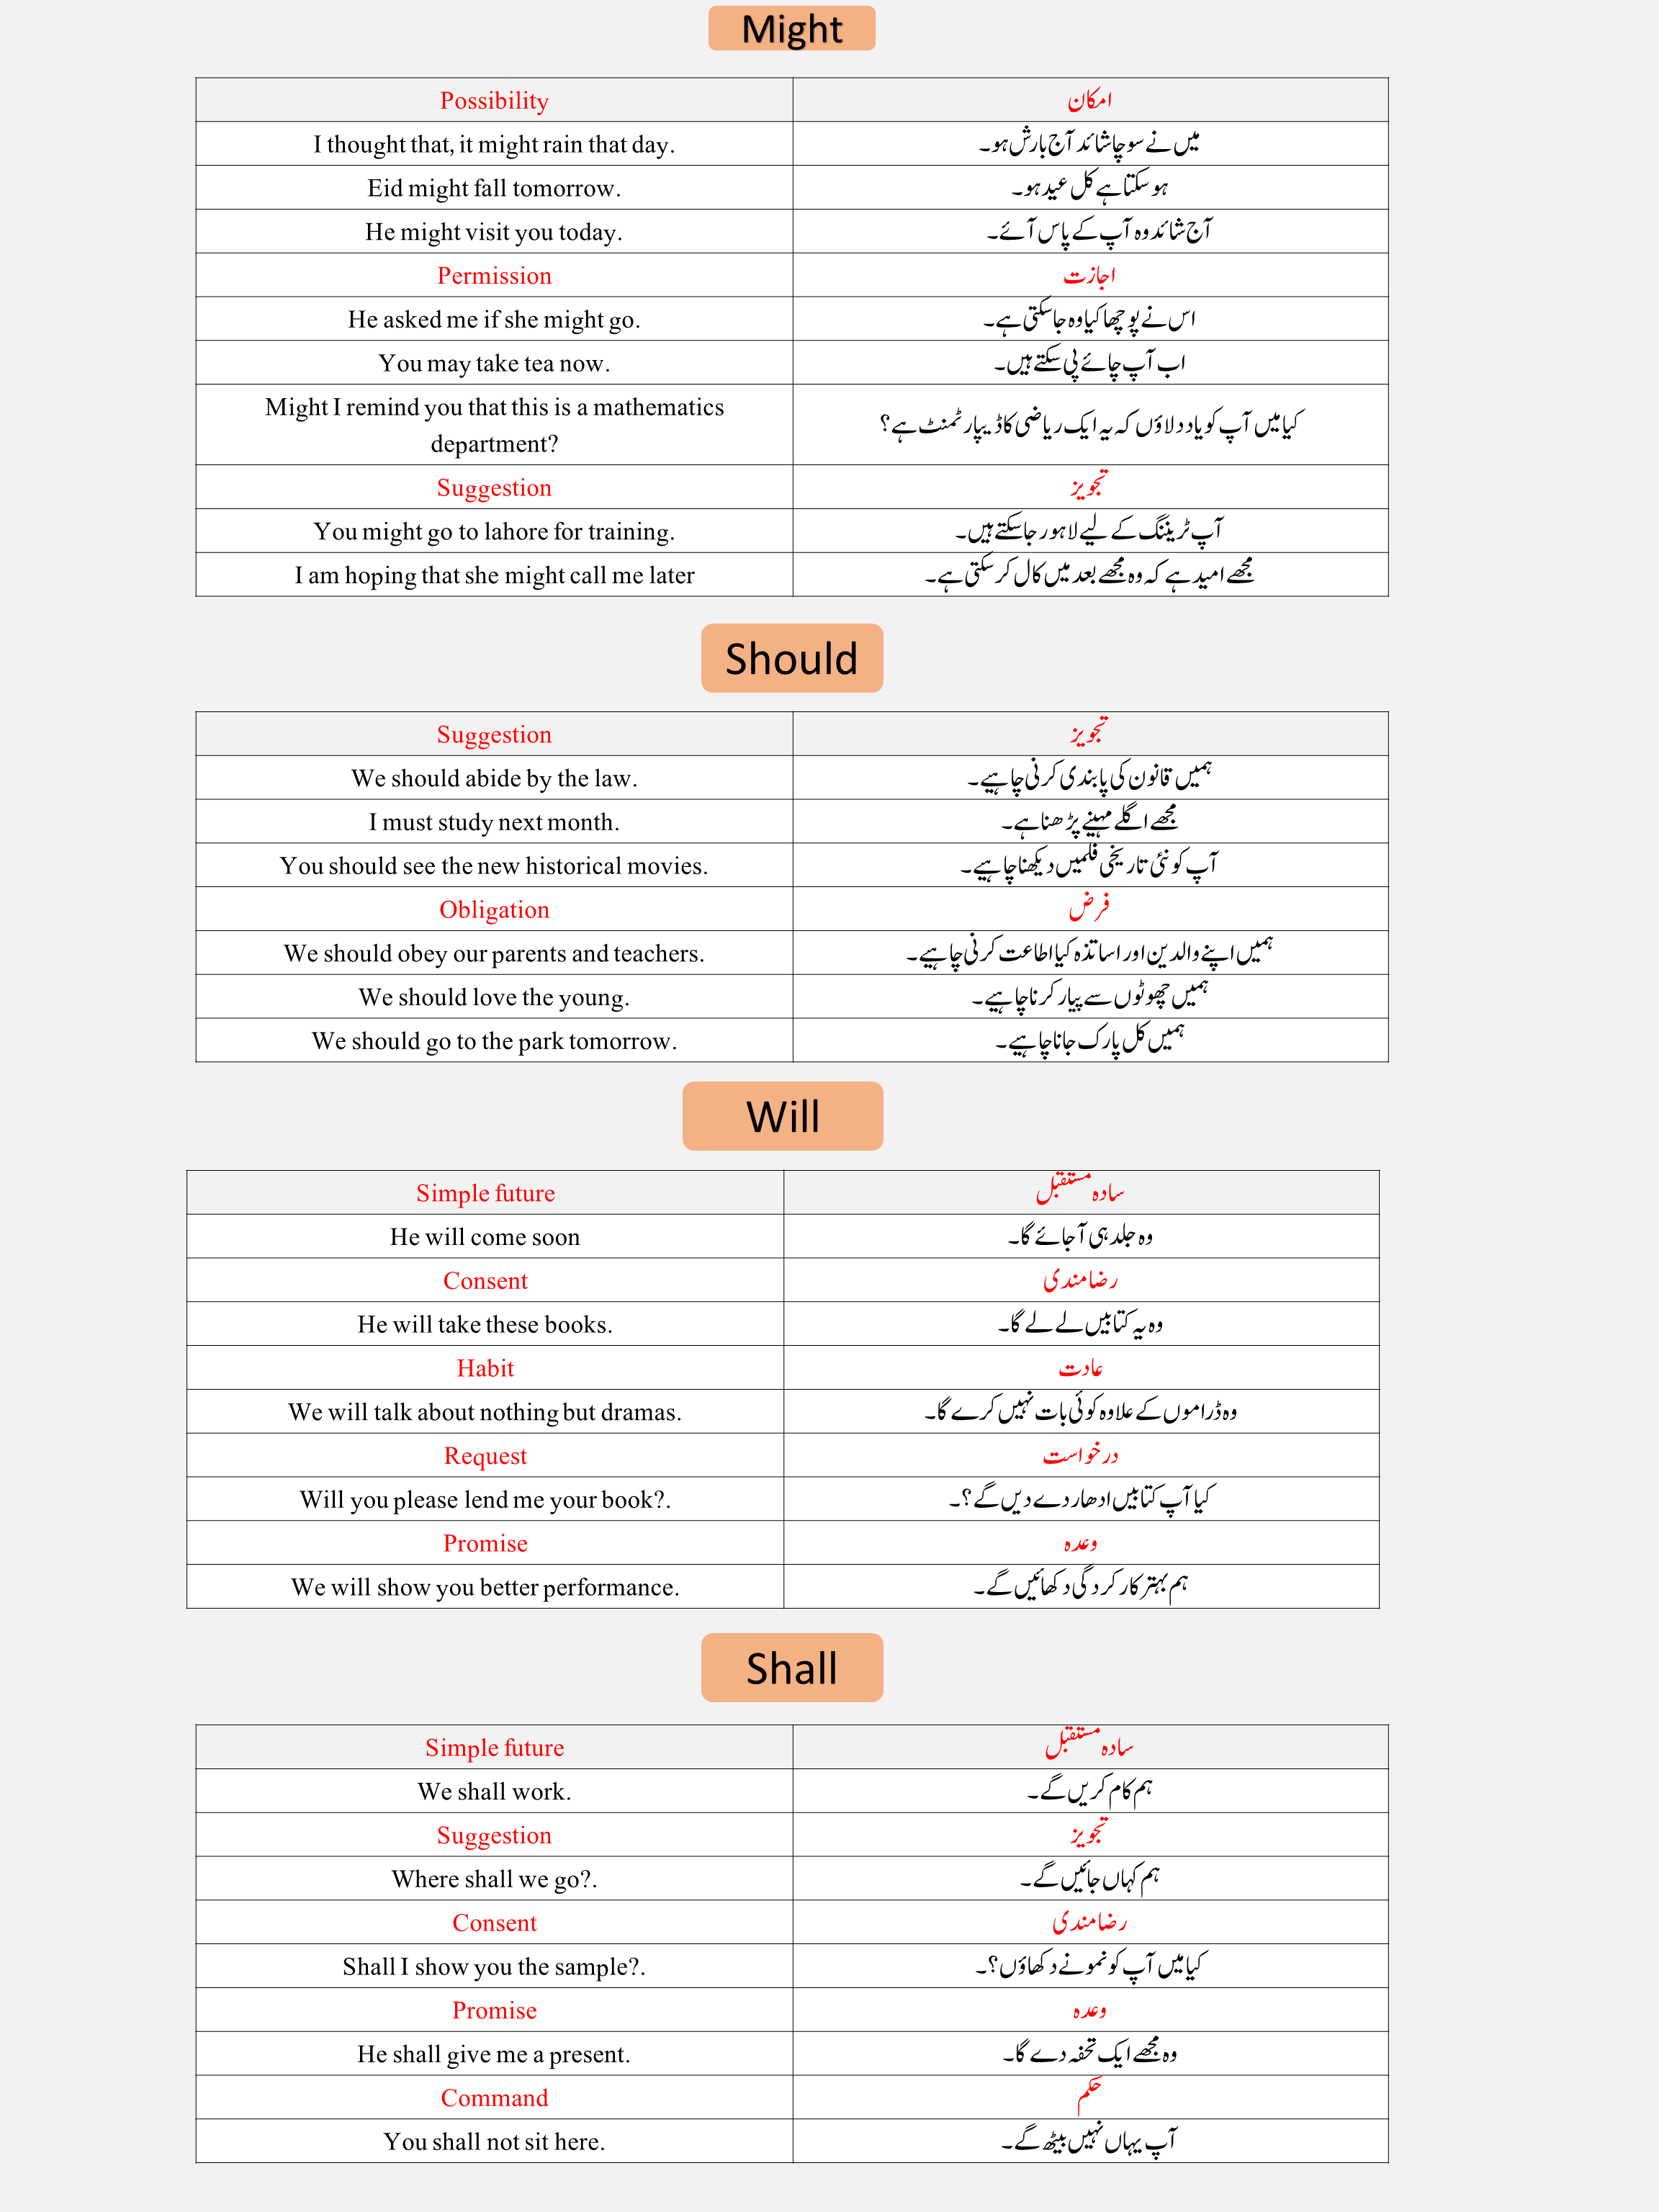 All Modal Verbs With List, Examples & Chart in Urdu/English